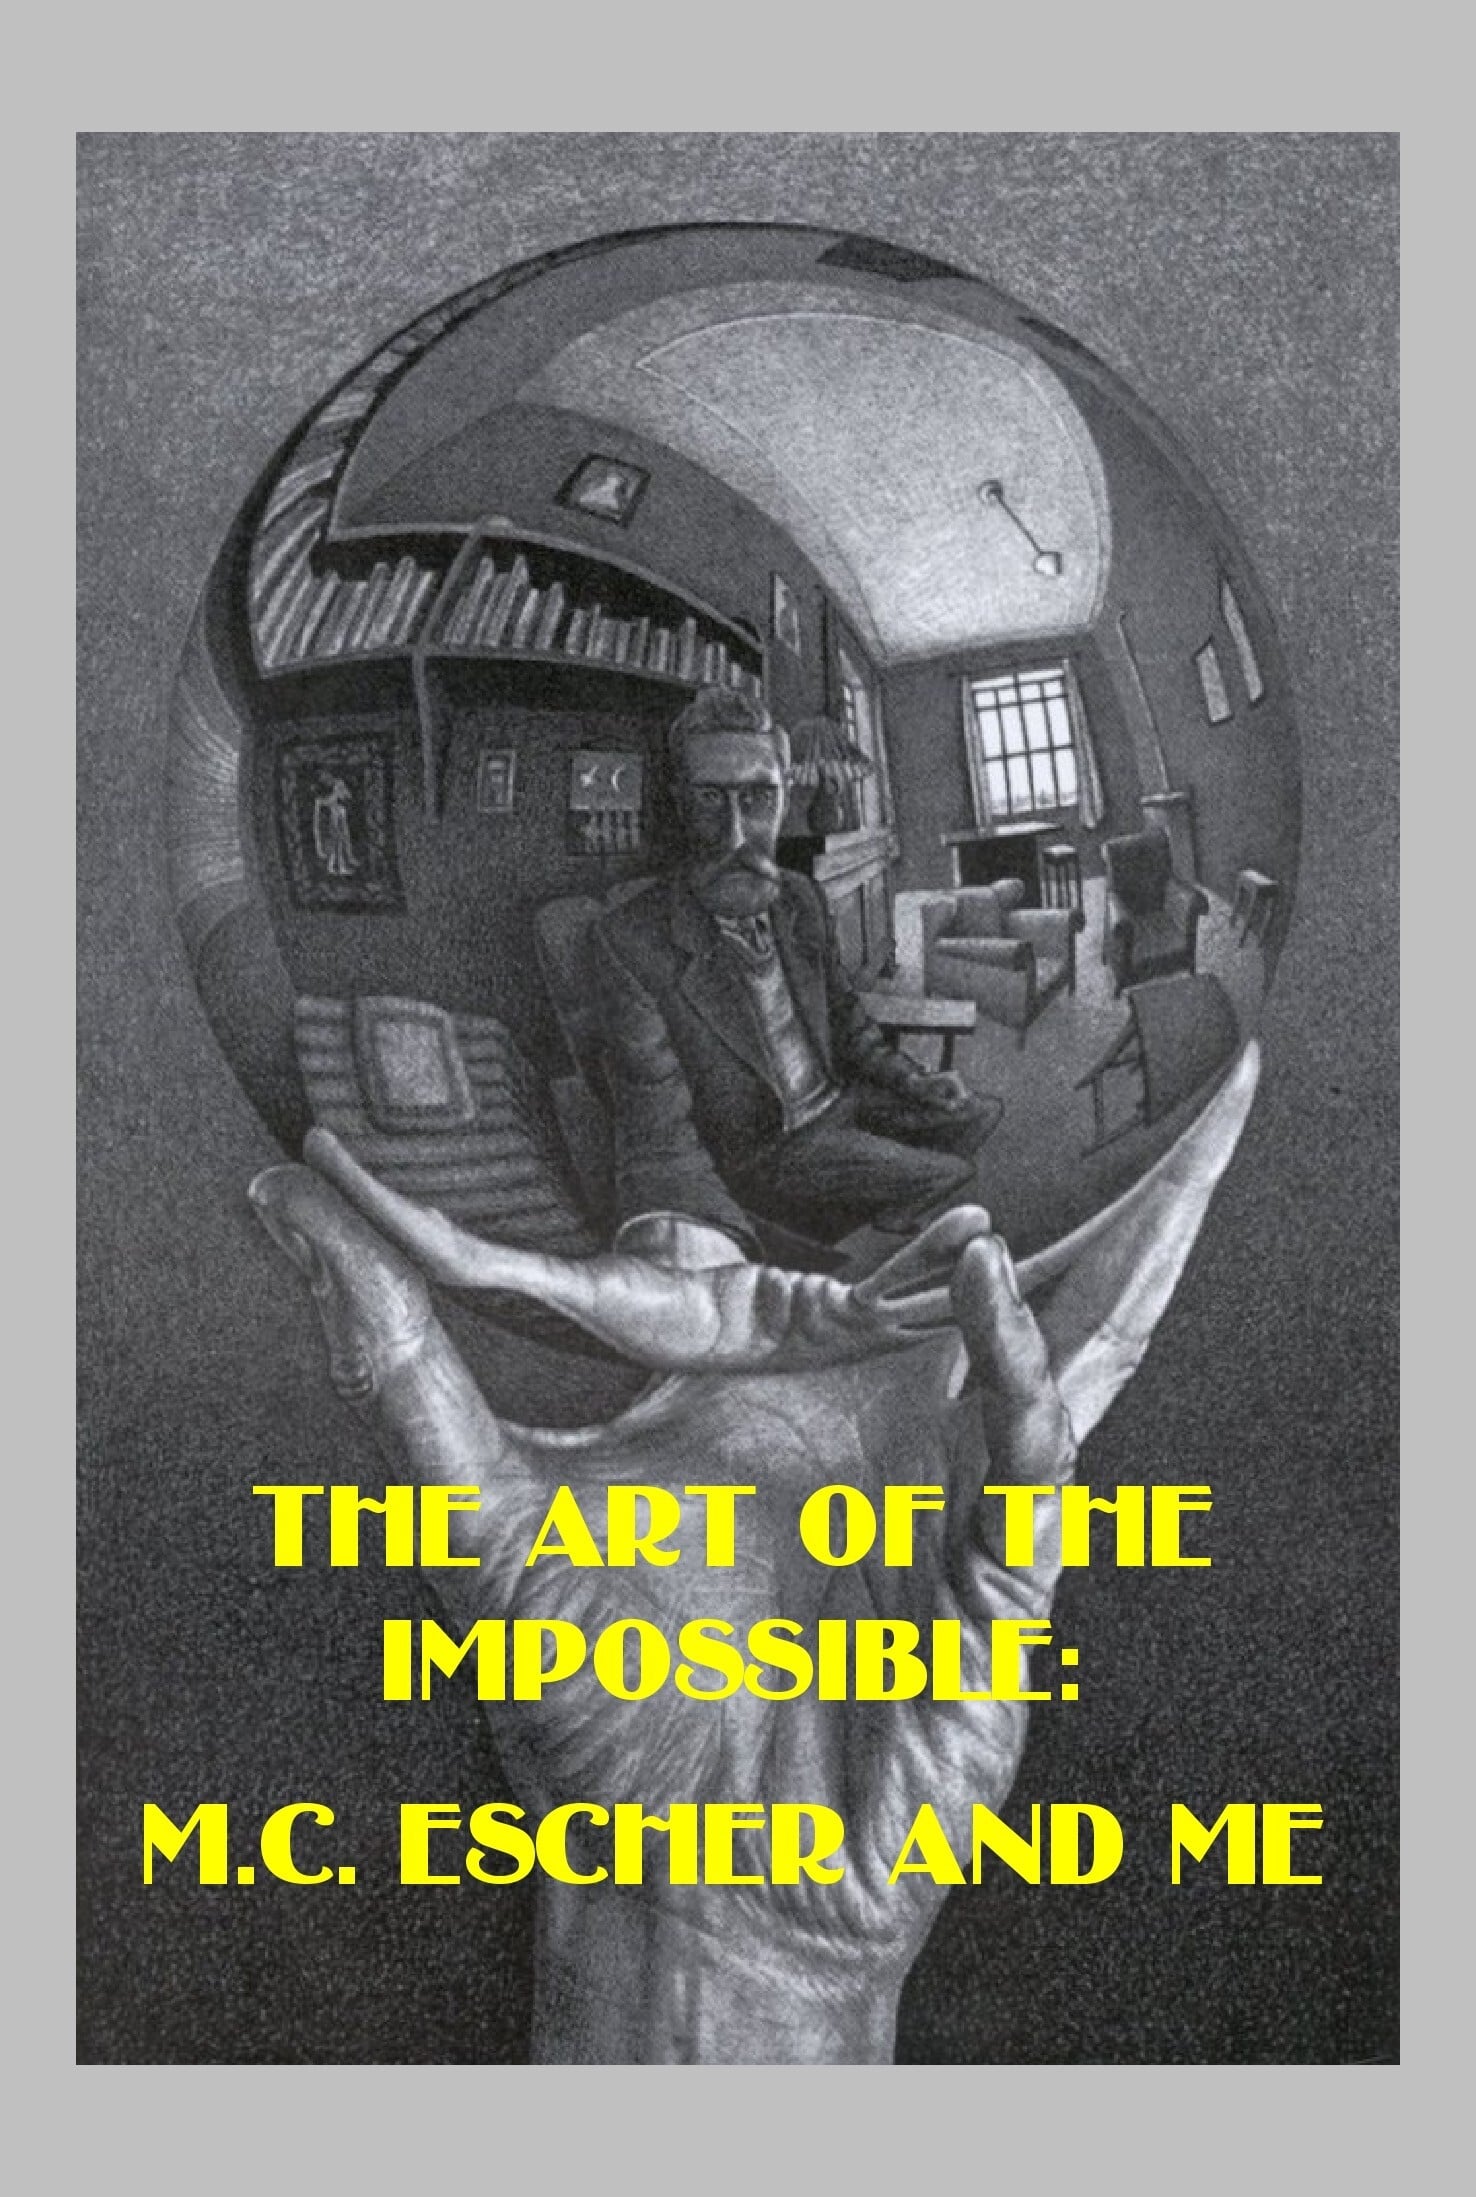 The Art of the Impossible: M.C. Escher and Me